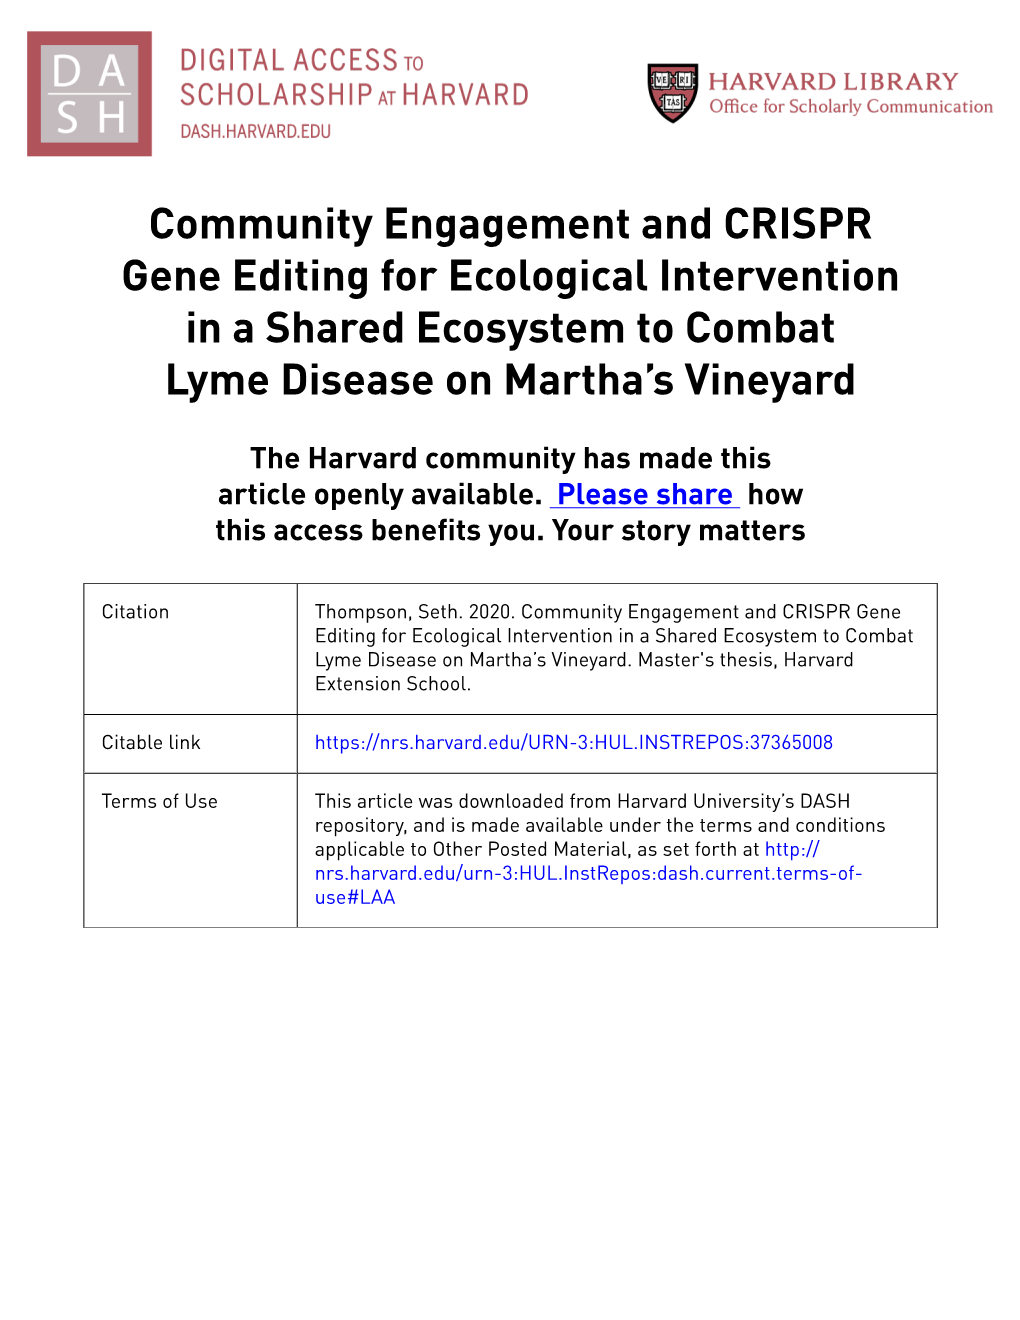 Community Engagement and CRISPR Gene Editing for Ecological Intervention in a Shared Ecosystem to Combat Lyme Disease on Martha’S Vineyard